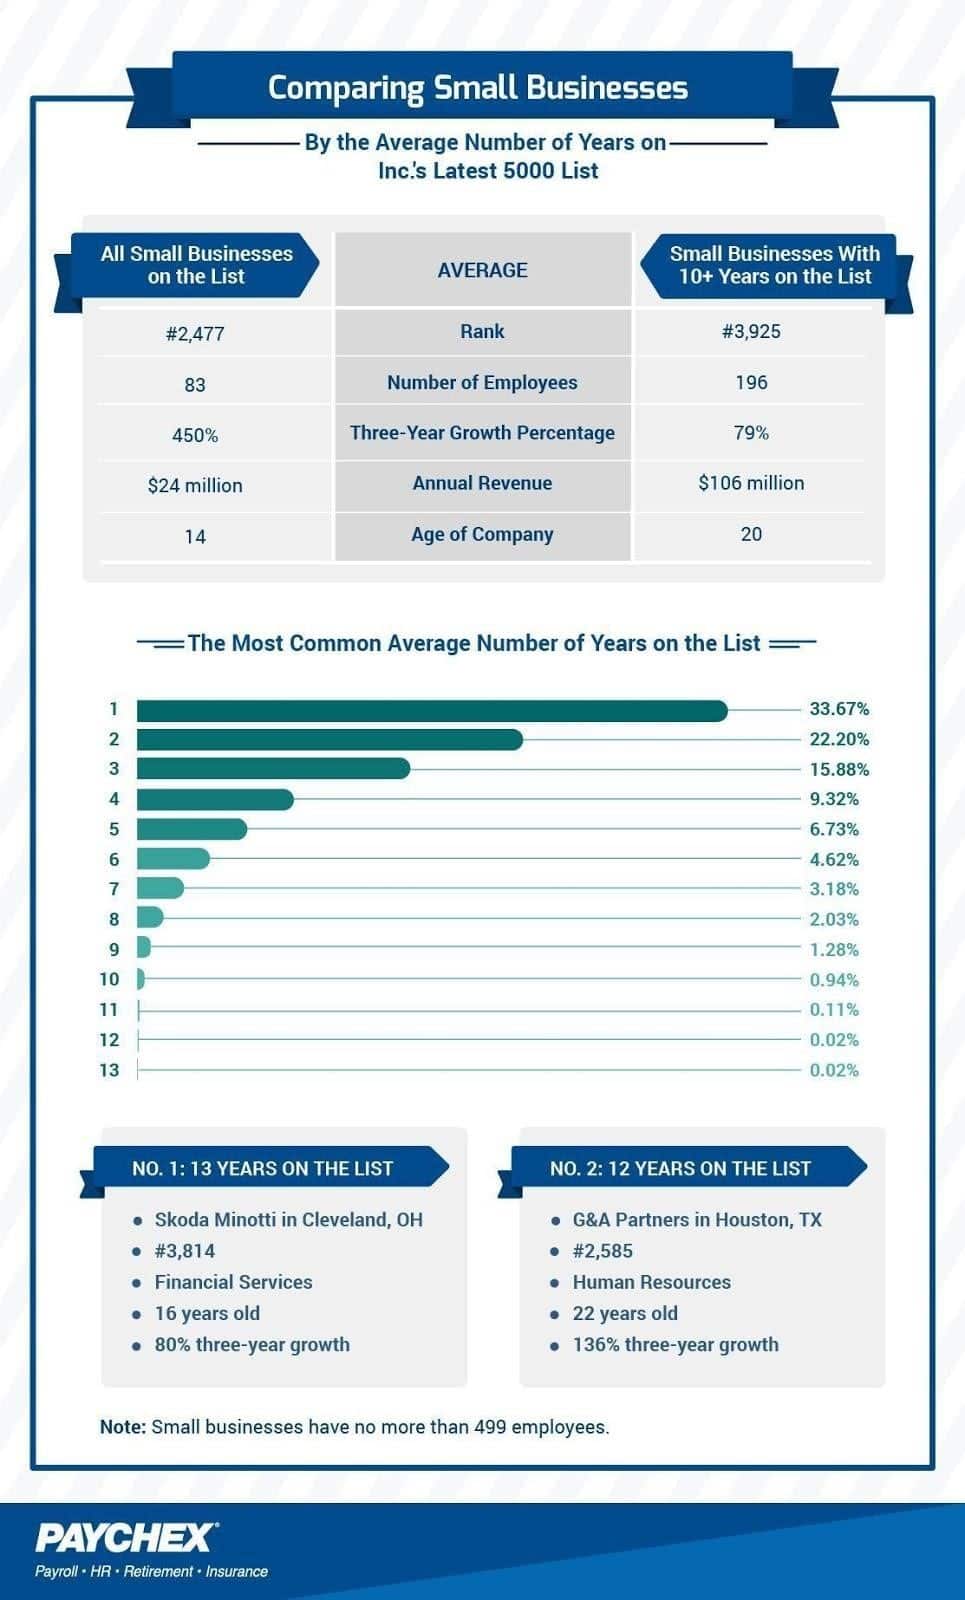 Comparing Small Businesses by Average Number of Years on Inc. 5000 List